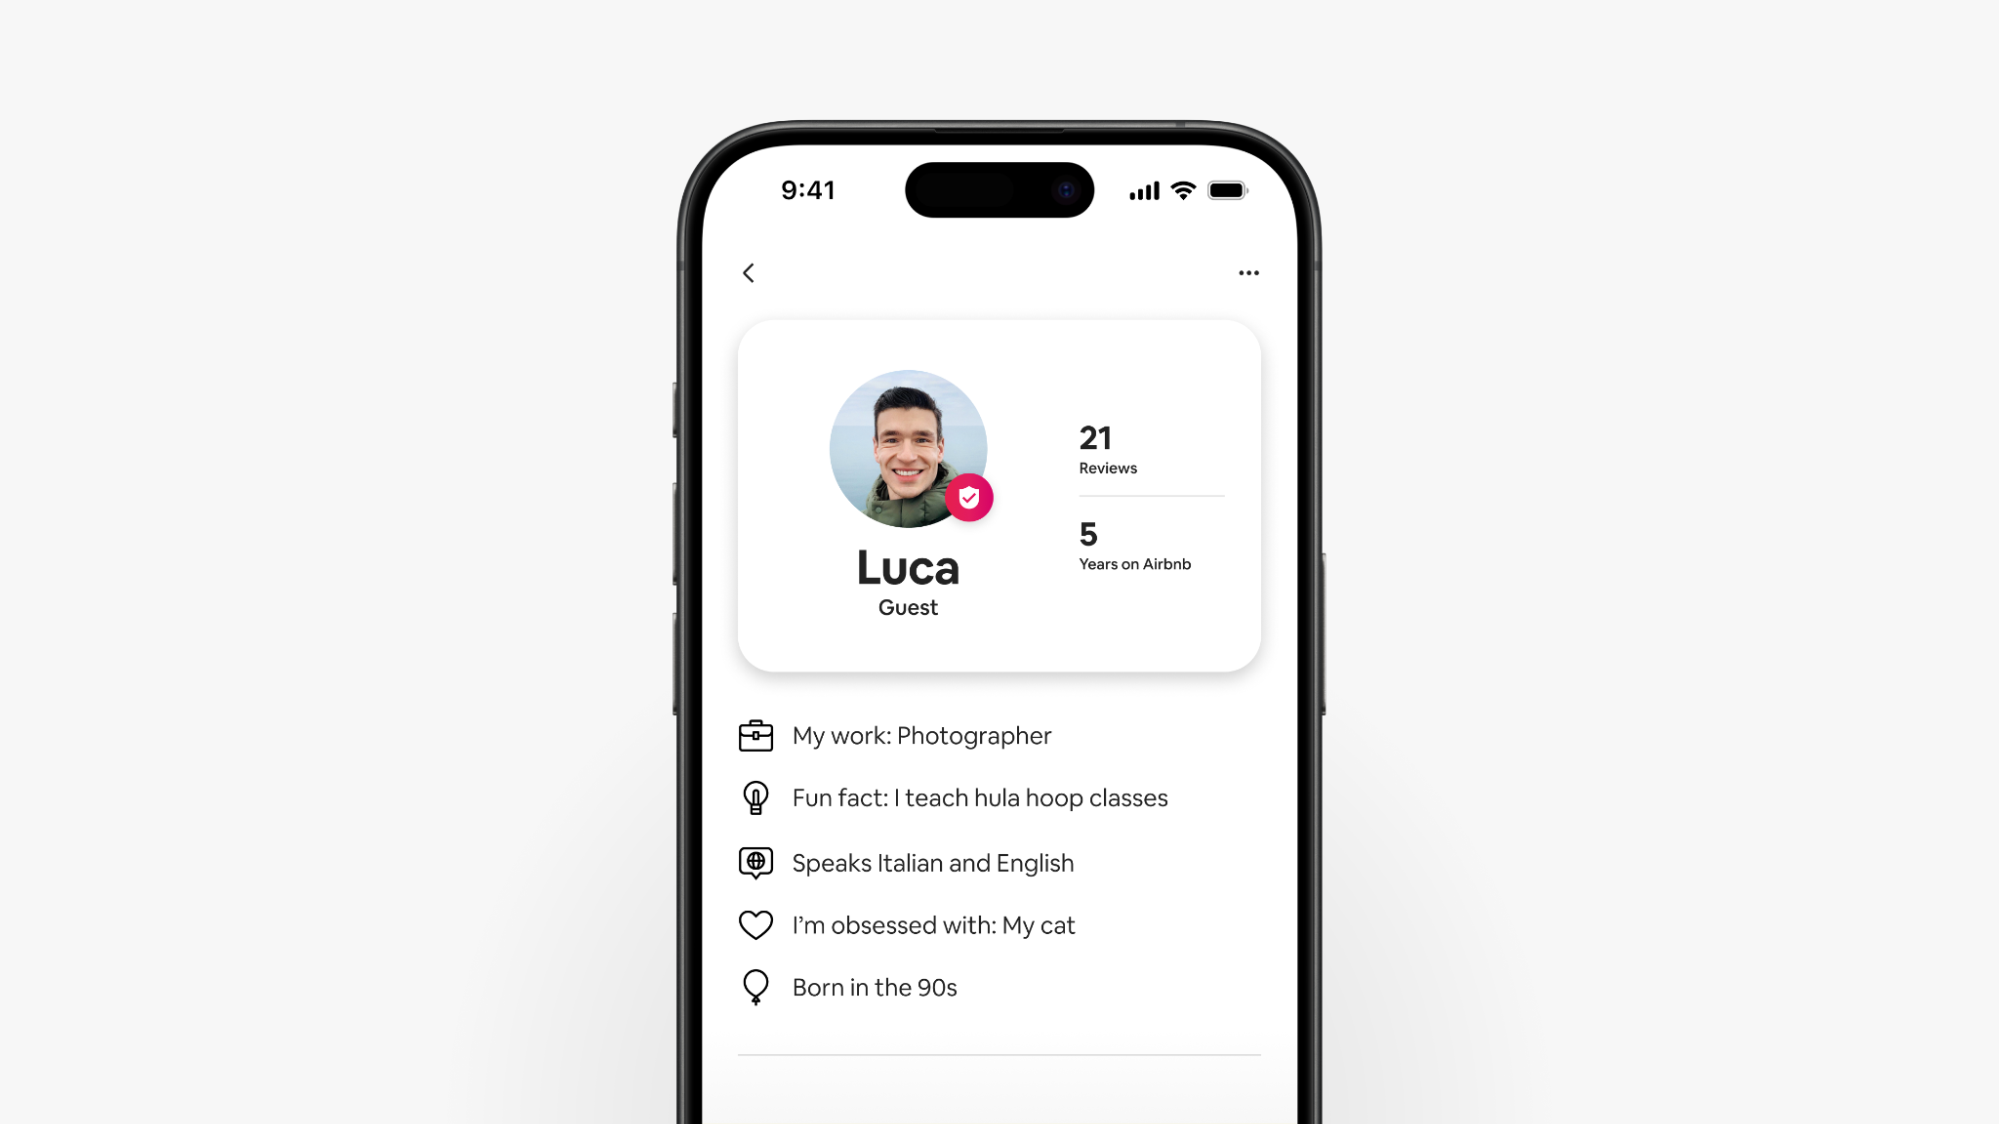 A screenshot of a smartphone displays Luca’s upgraded Airbnb guest profile, which shows reviews and details about the guest.